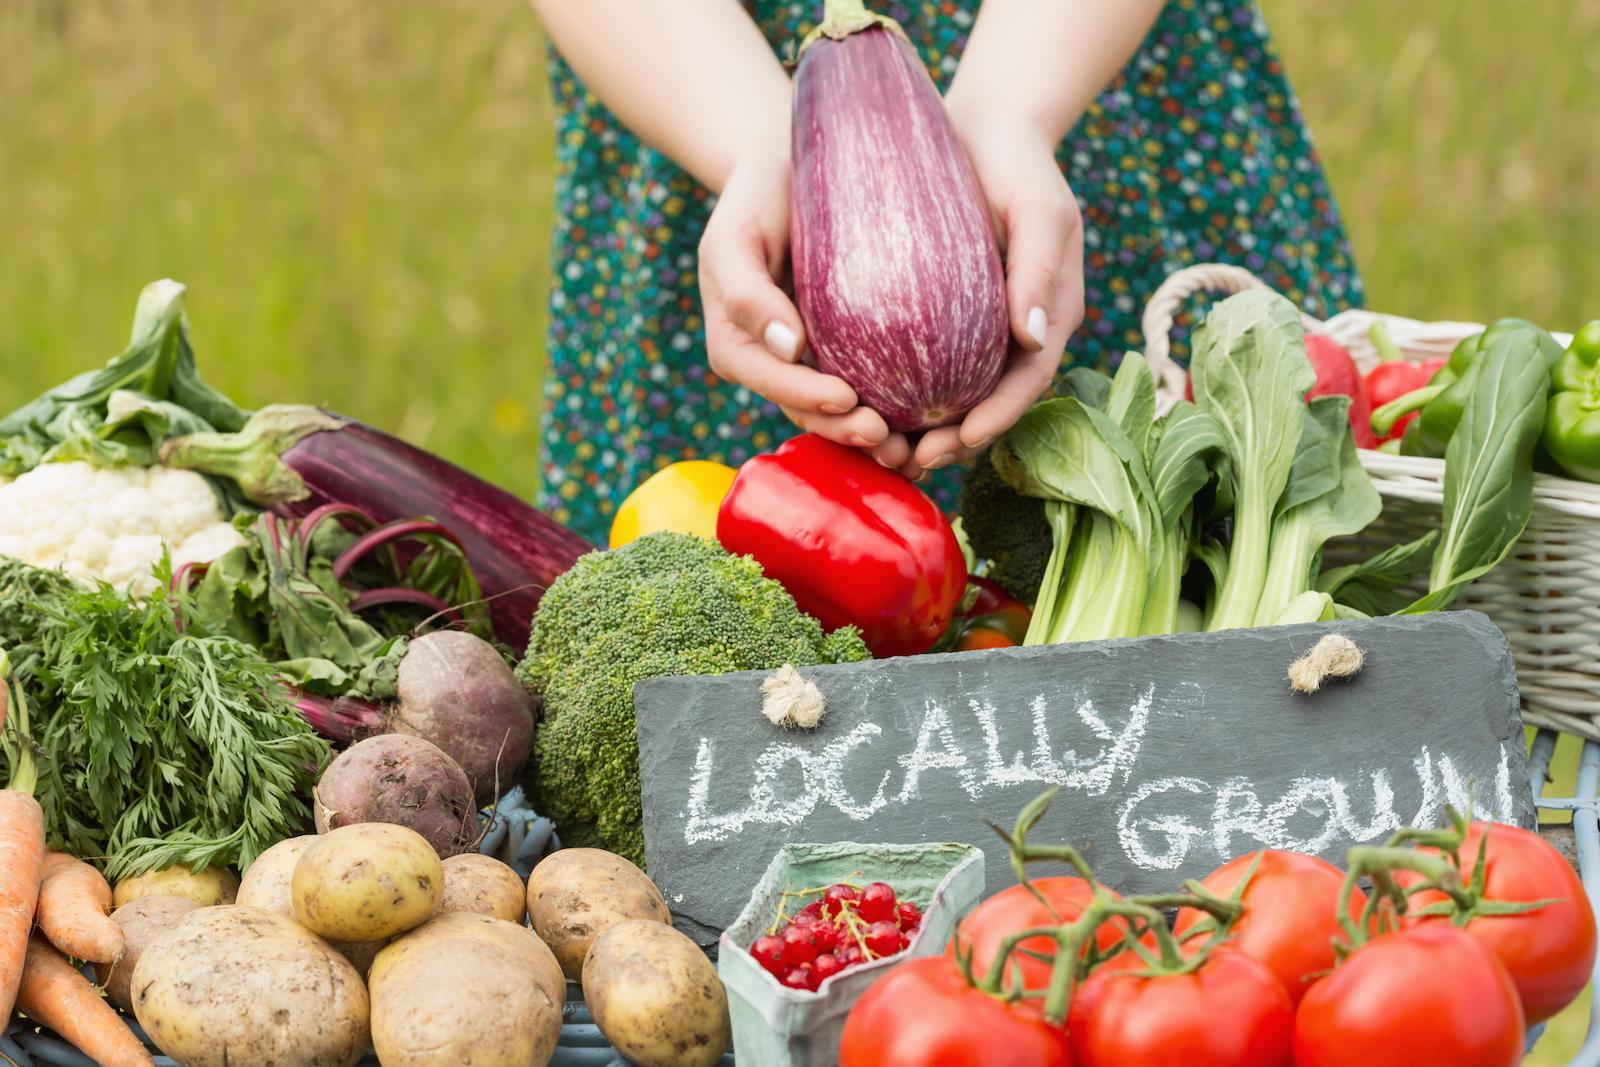 growing local food to be sold off the grid